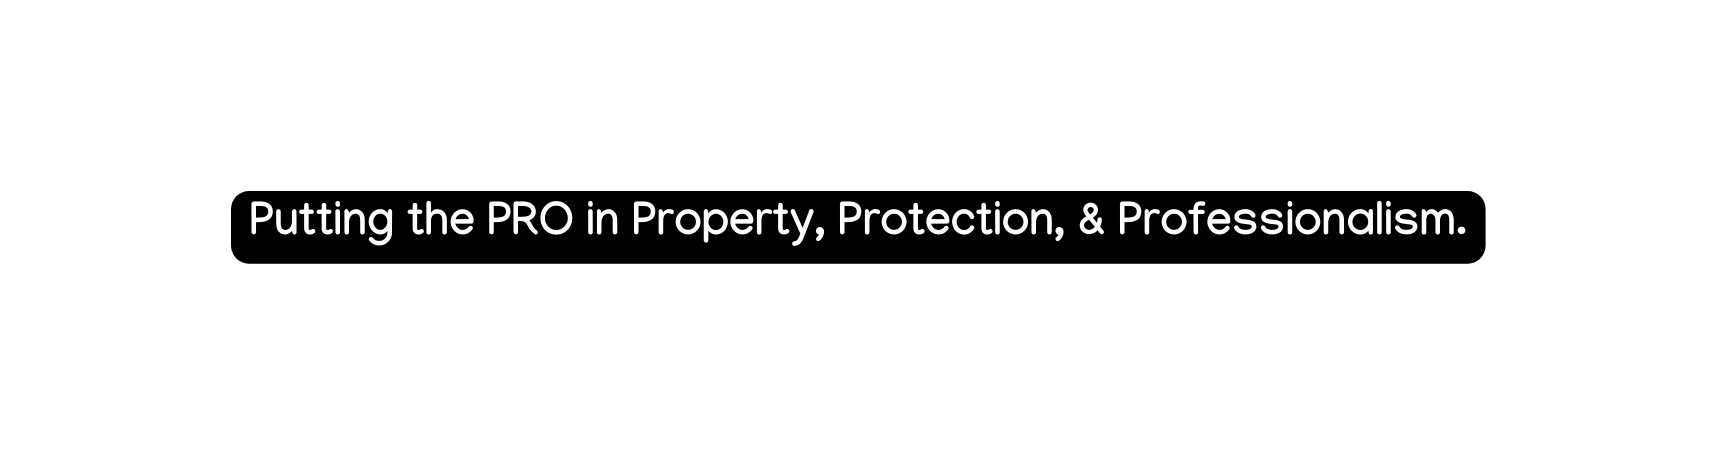 Putting the PRO in Property Protection Professionalism